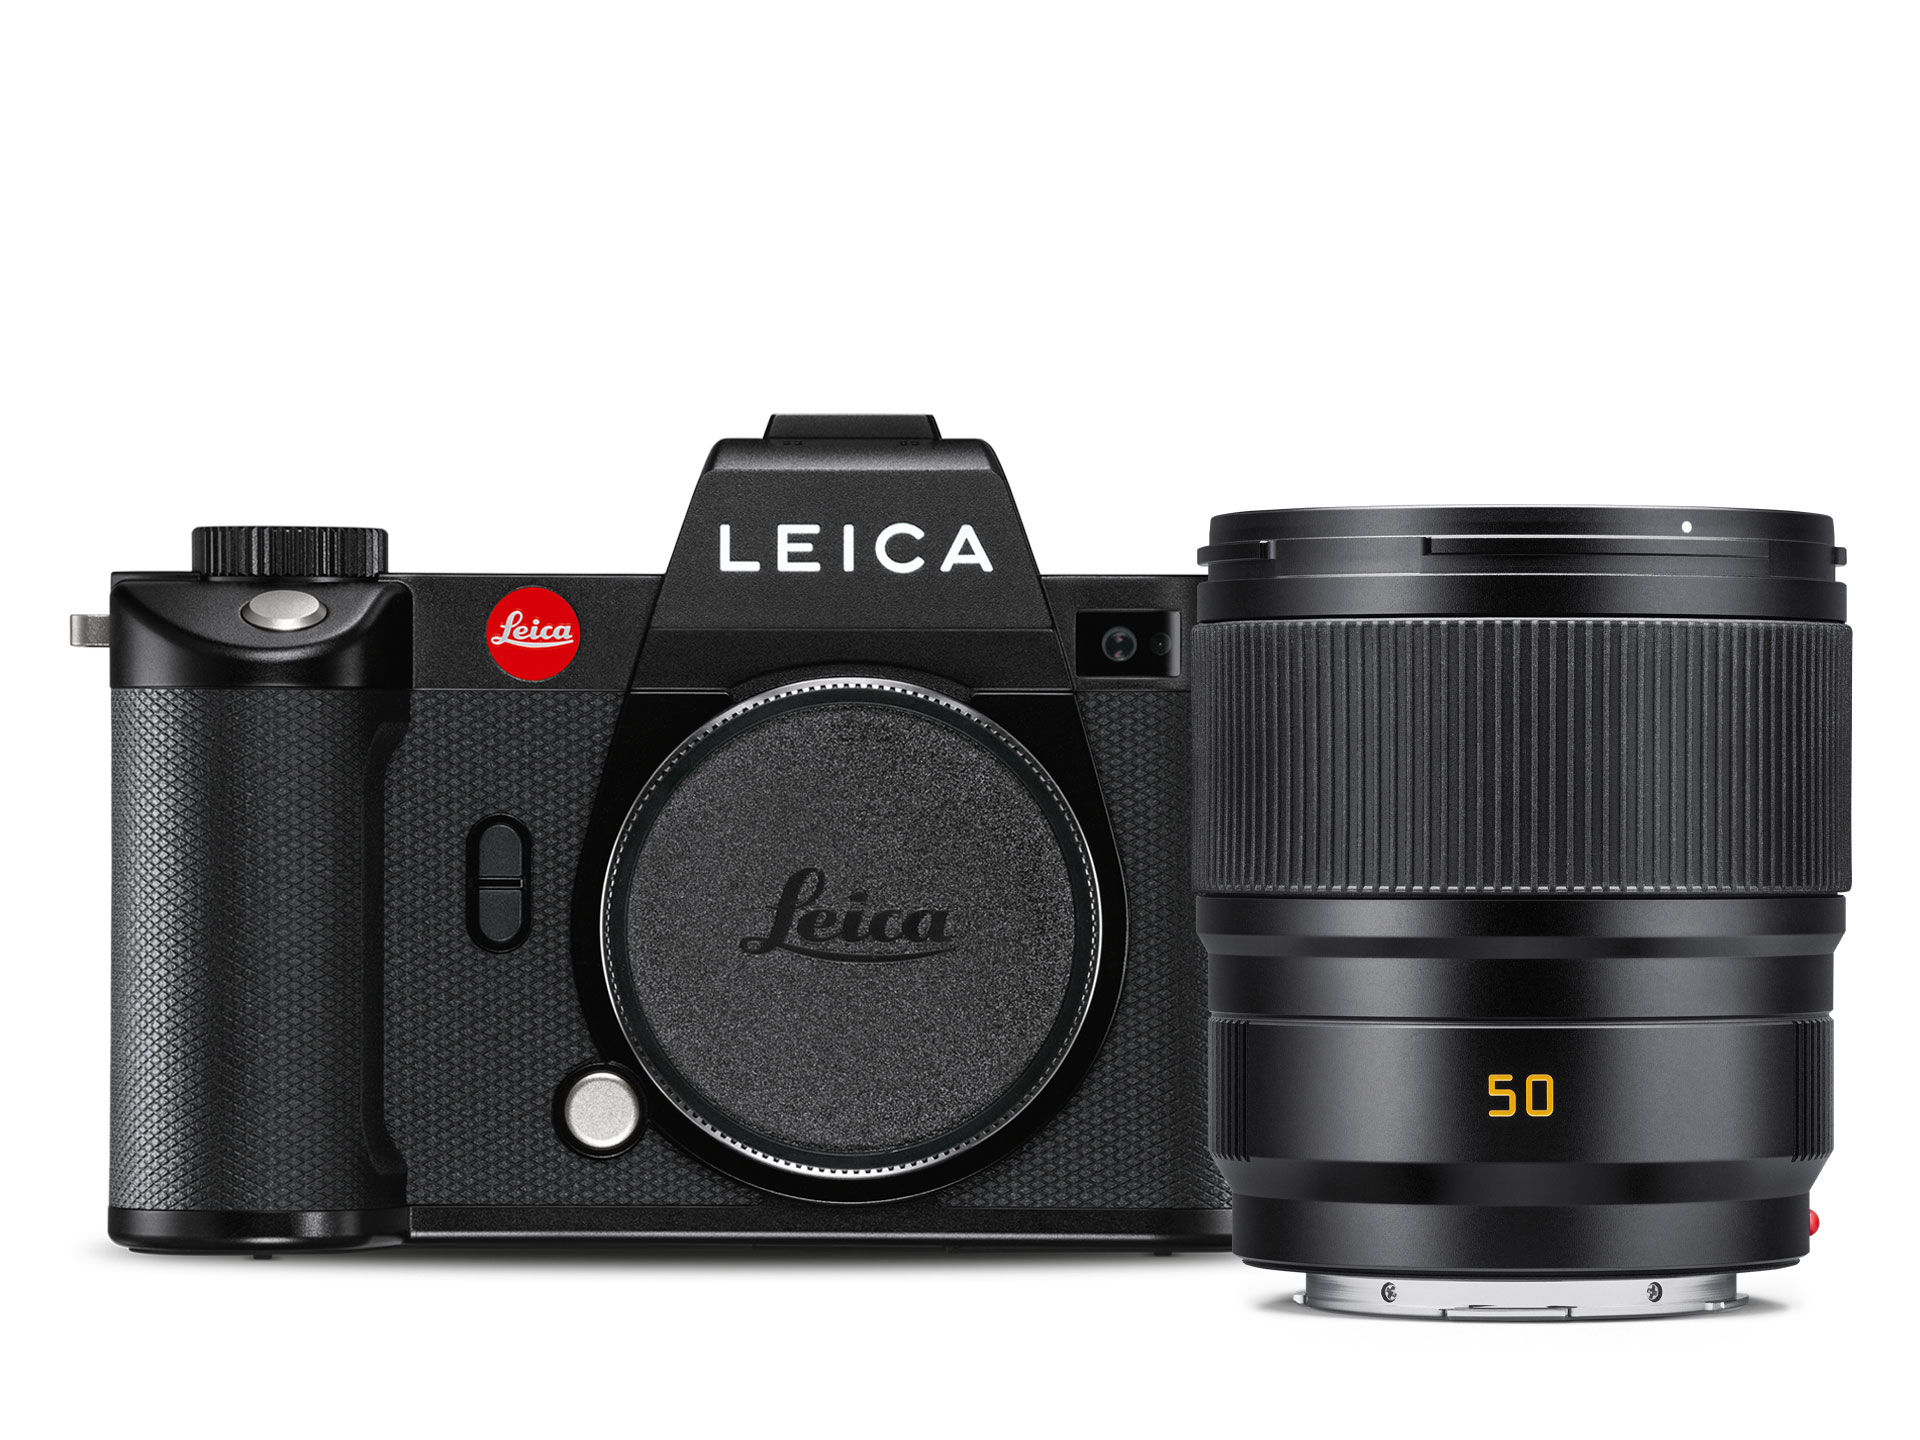 LEICA SL2 Kit with SL 2,0/50mm ASPH. Demo full guarantee